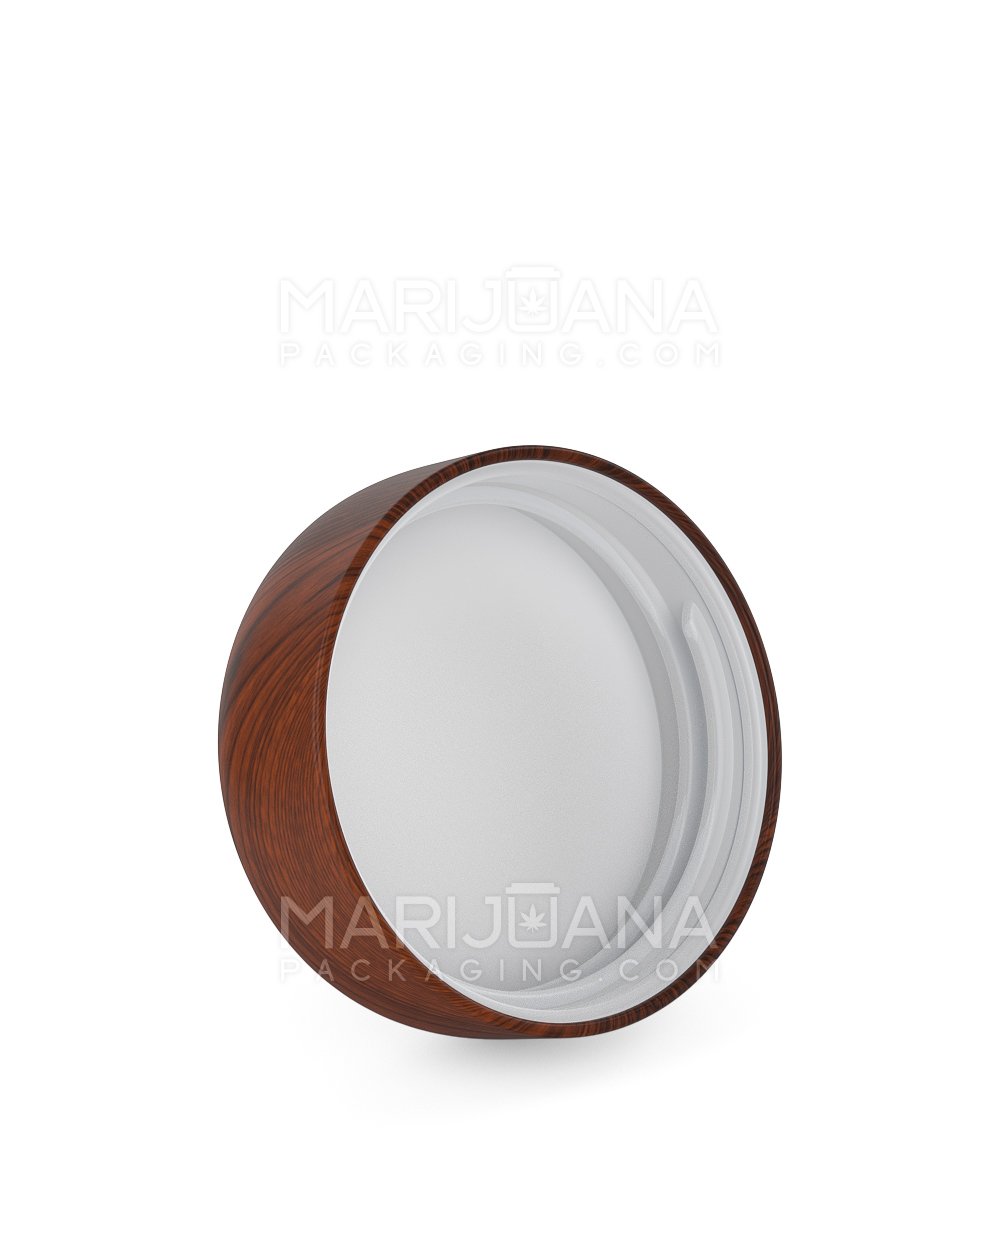 Child Resistant | Dome Push Down & Turn Plastic Caps w/ Foam Liner | 53mm - Redwood Wood - 120 Count - 2